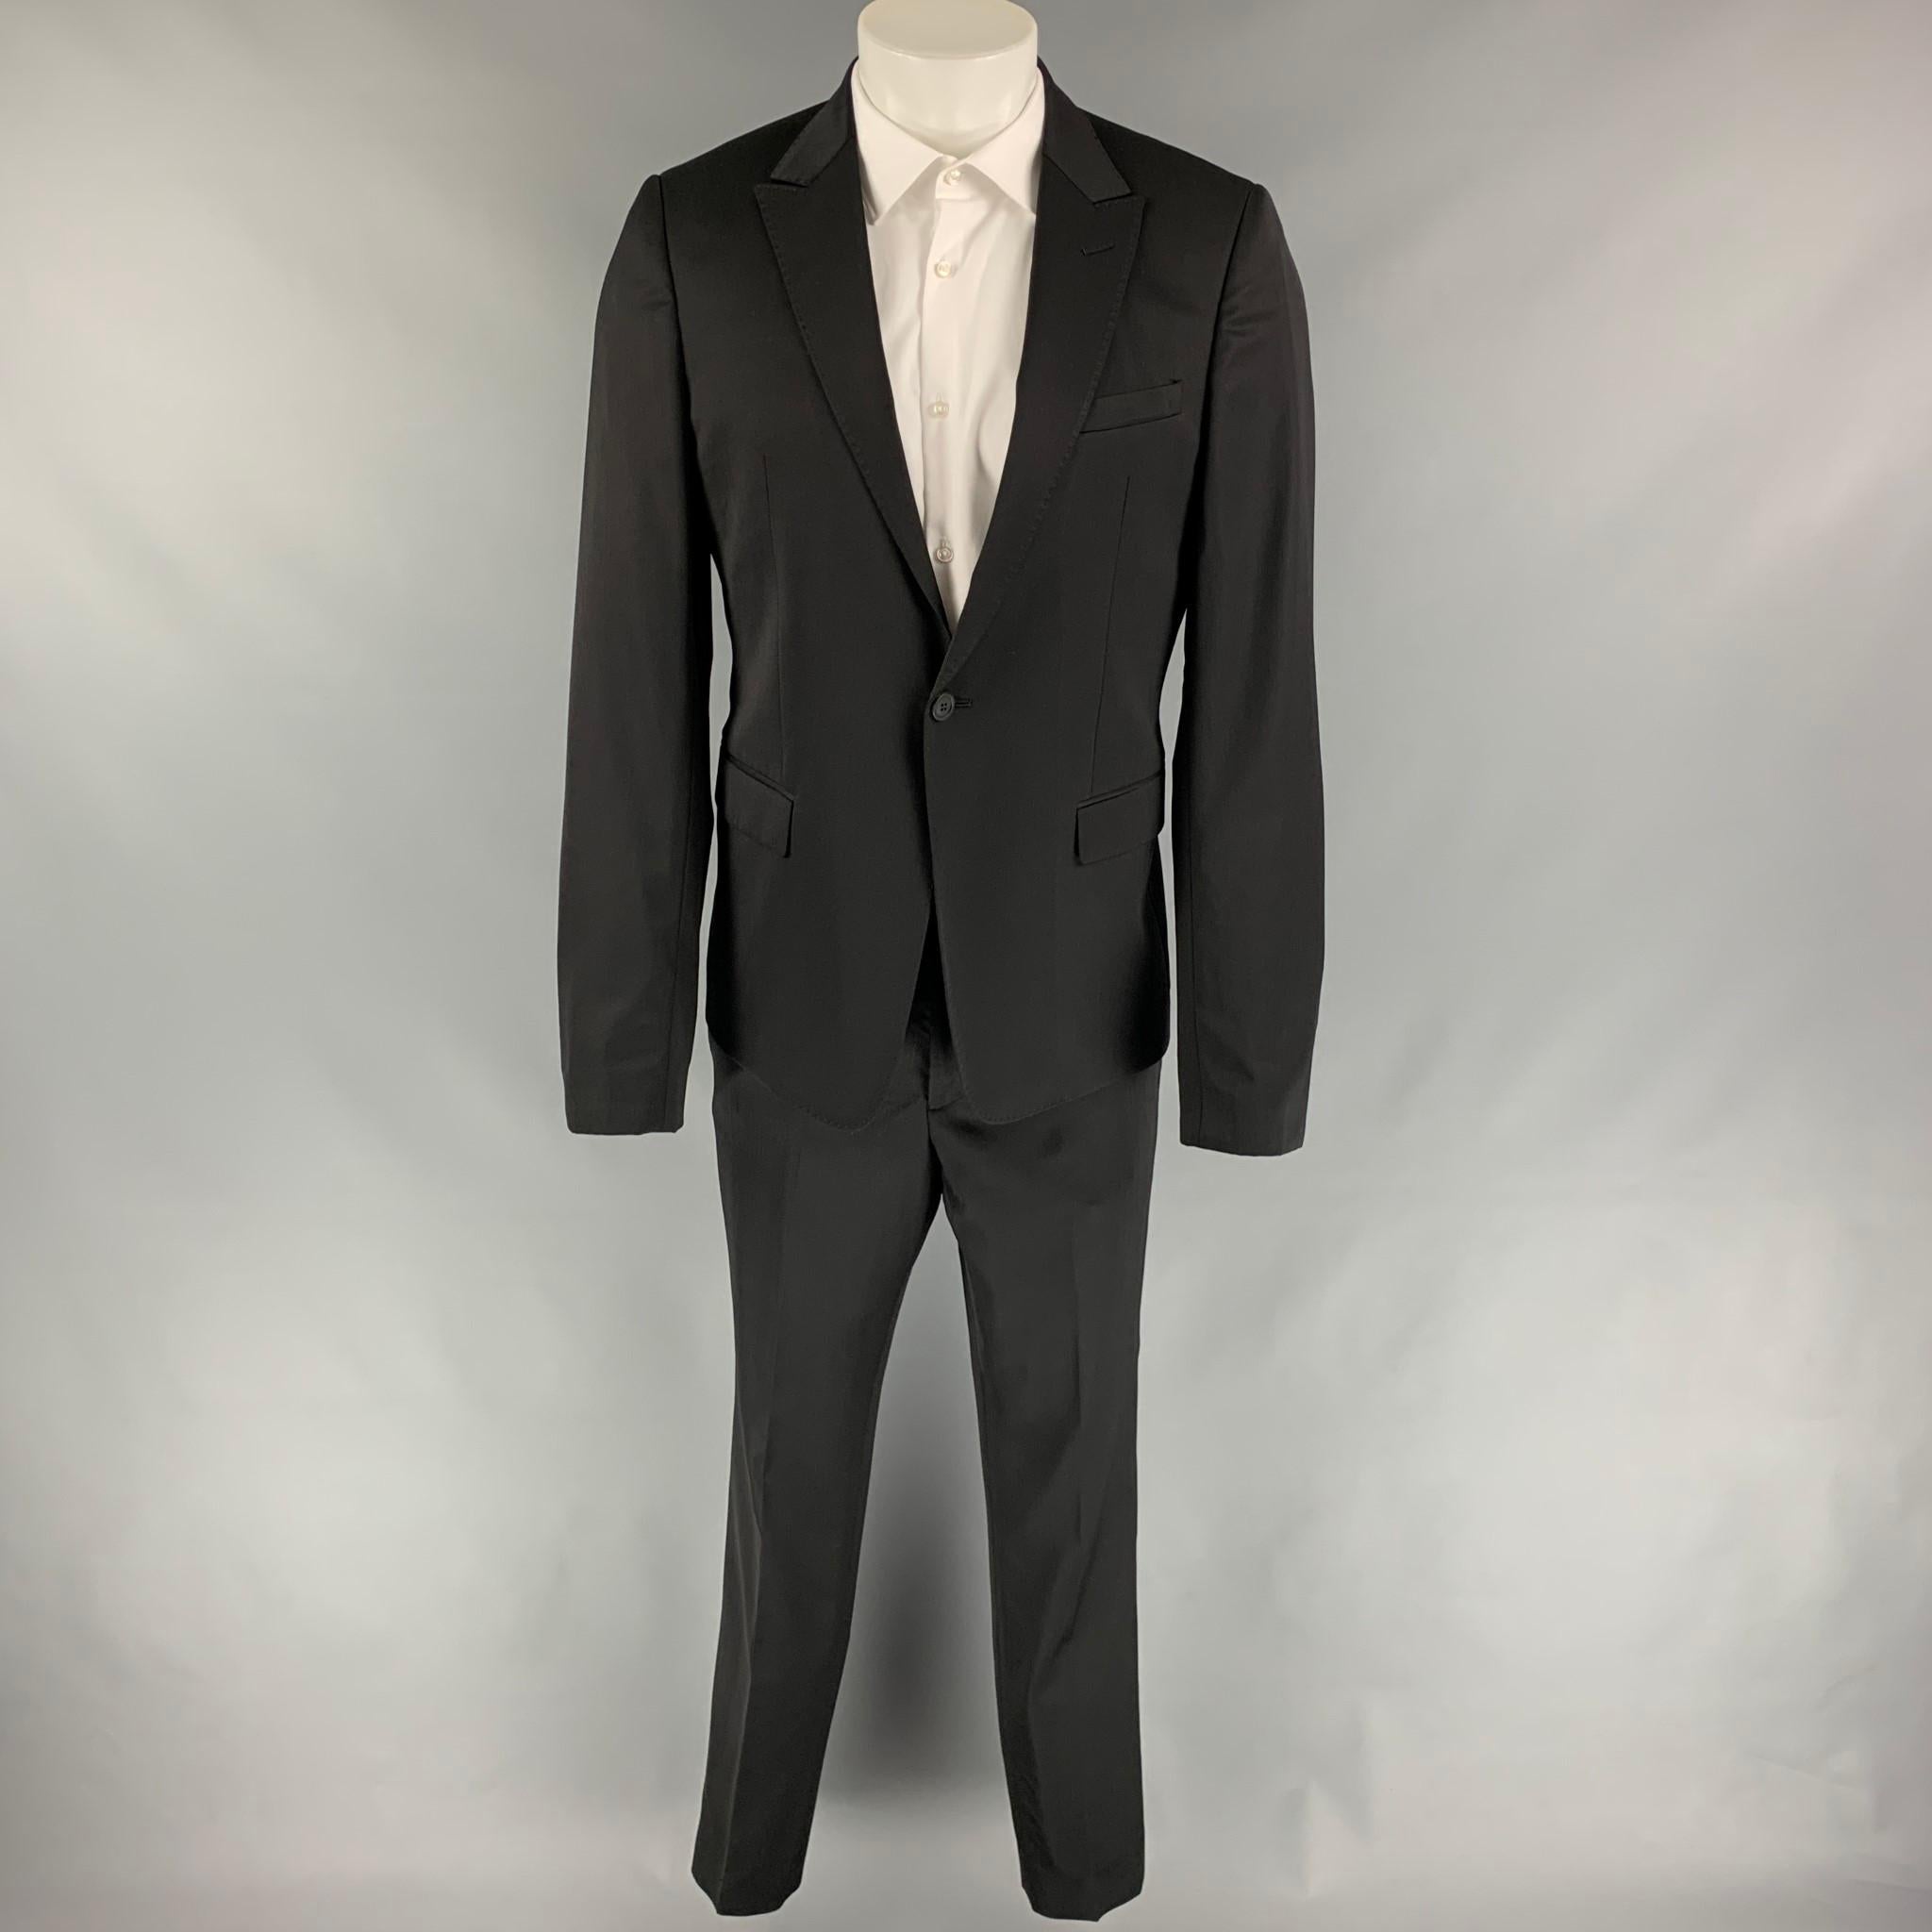 EMPORIO ARMANI suit comes in a black virgin wool / polyamide with a full liner and includes a single breasted, two button sport coat with a peak lapel and matching flat front trousers. Made in Italy.

Very Good Pre-Owned Condition.
Marked: